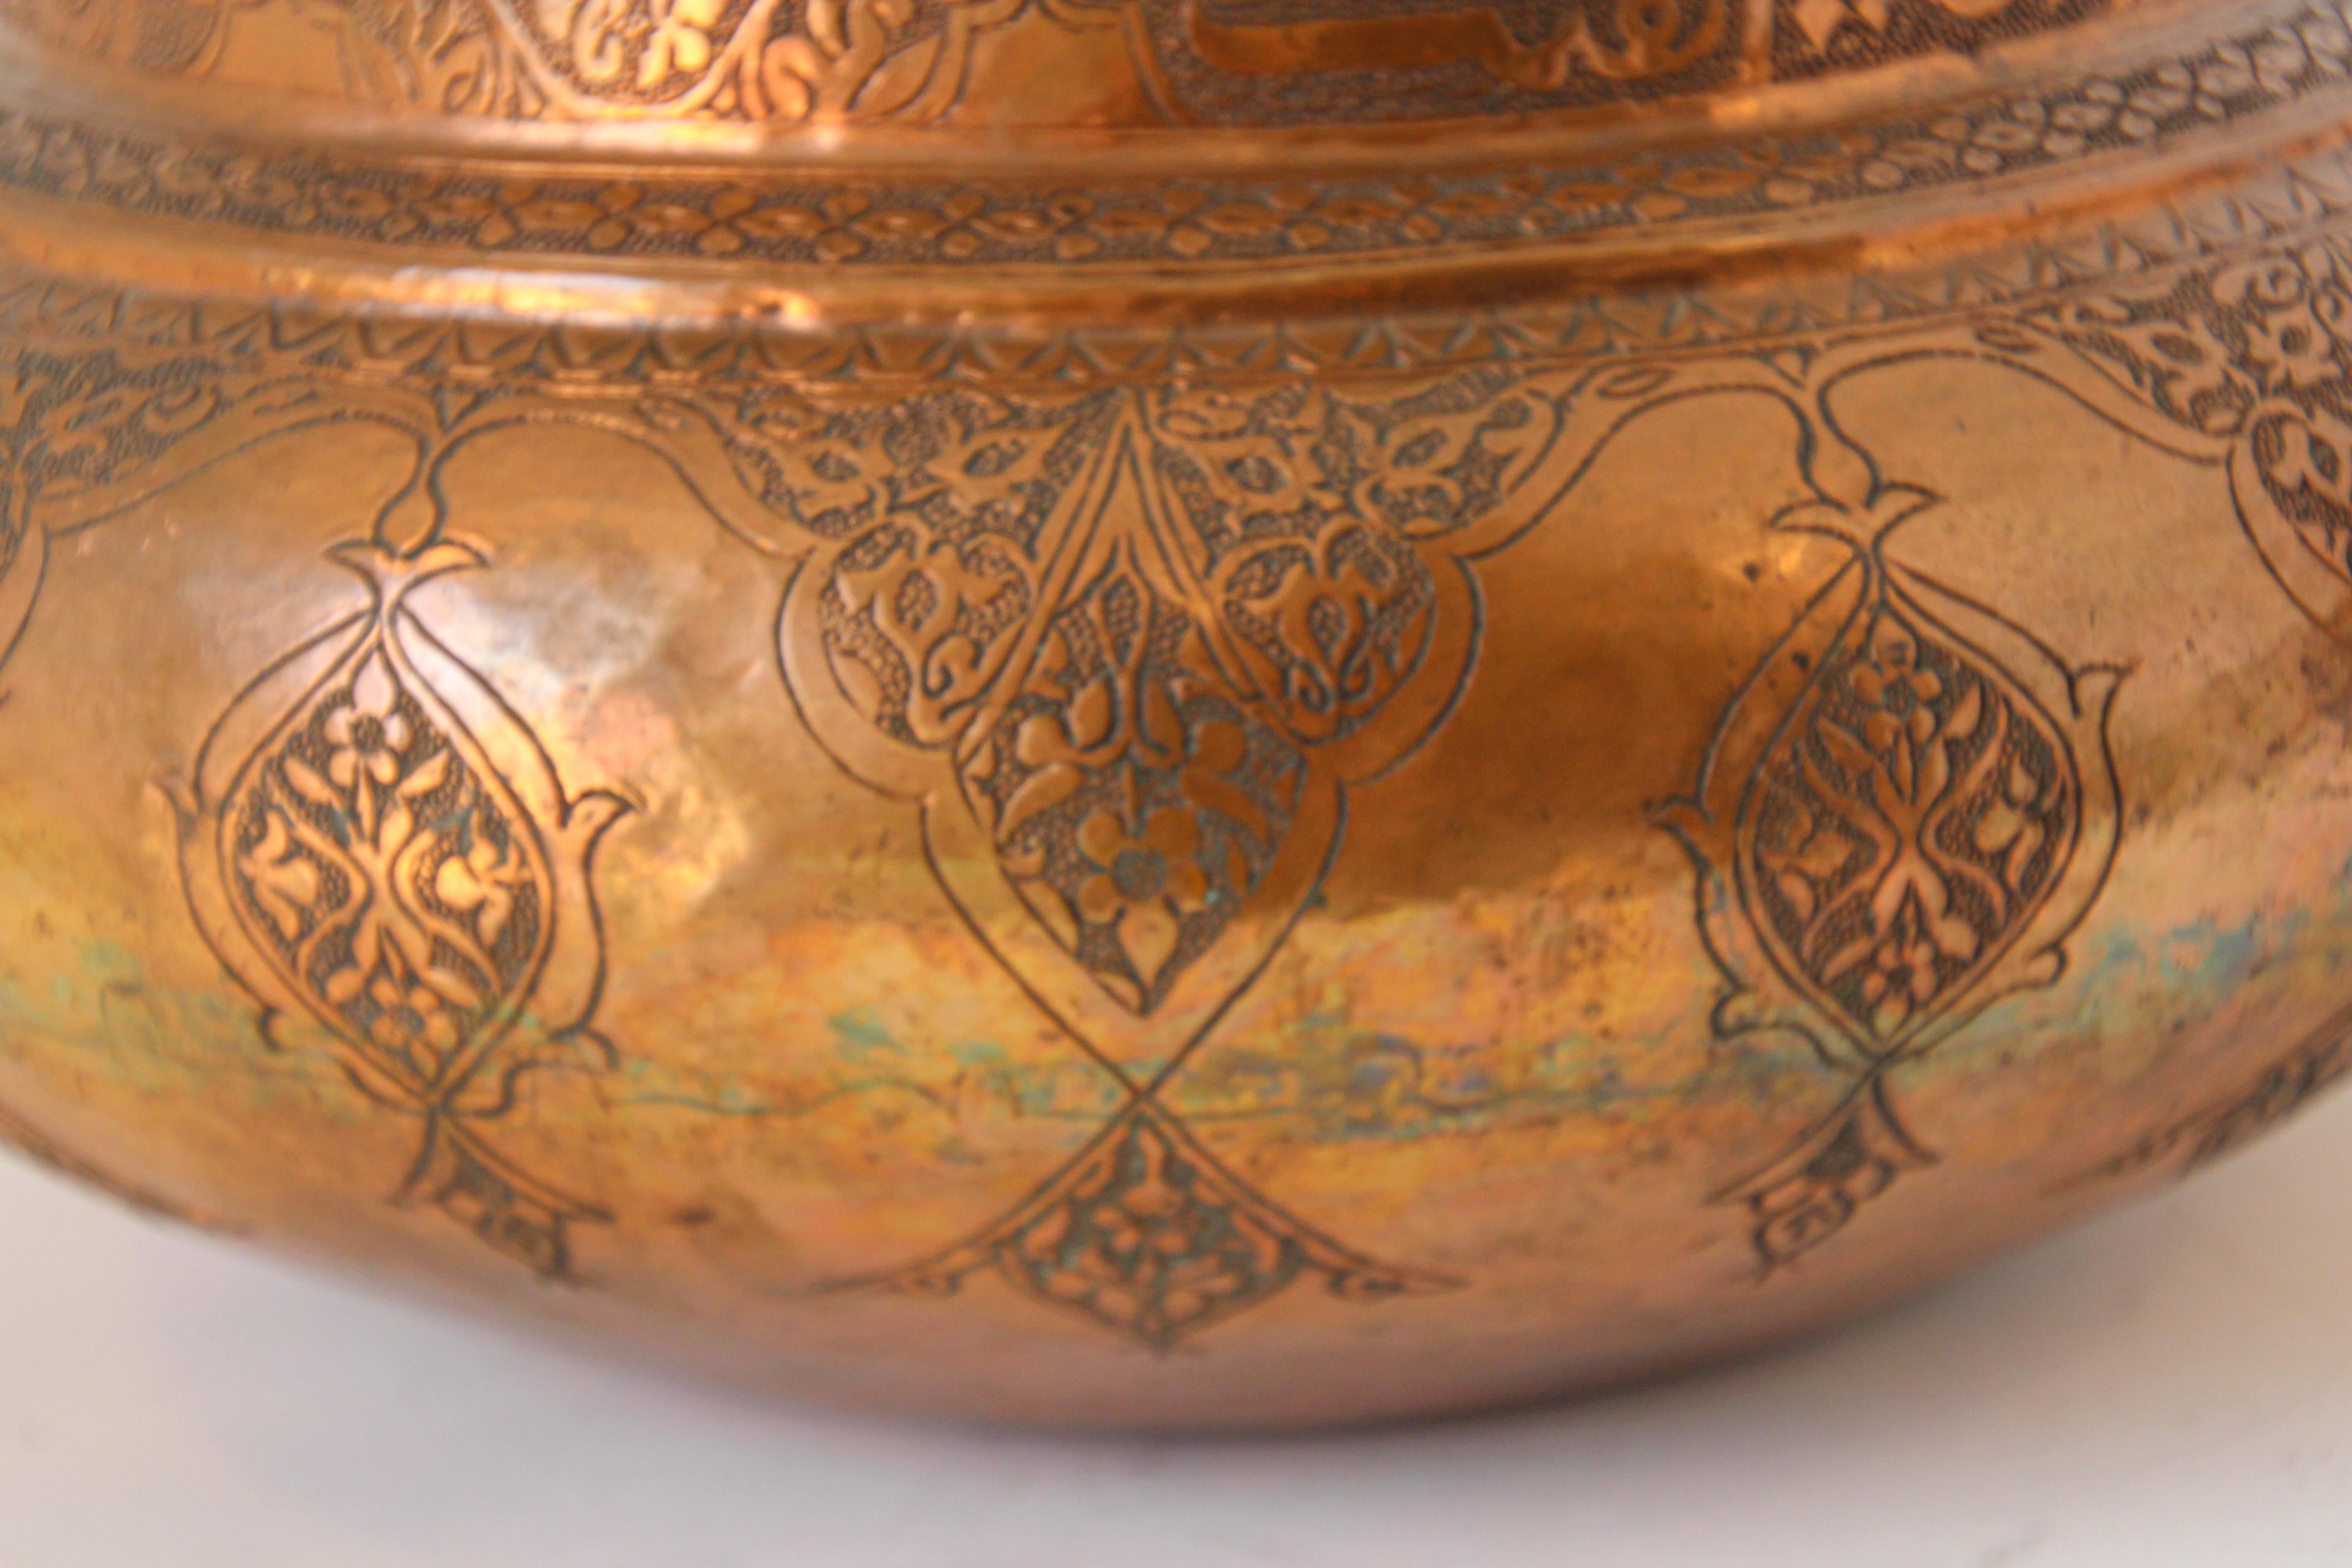 Moorish Indo-Persian Tinned Copper Jar With Lid For Sale